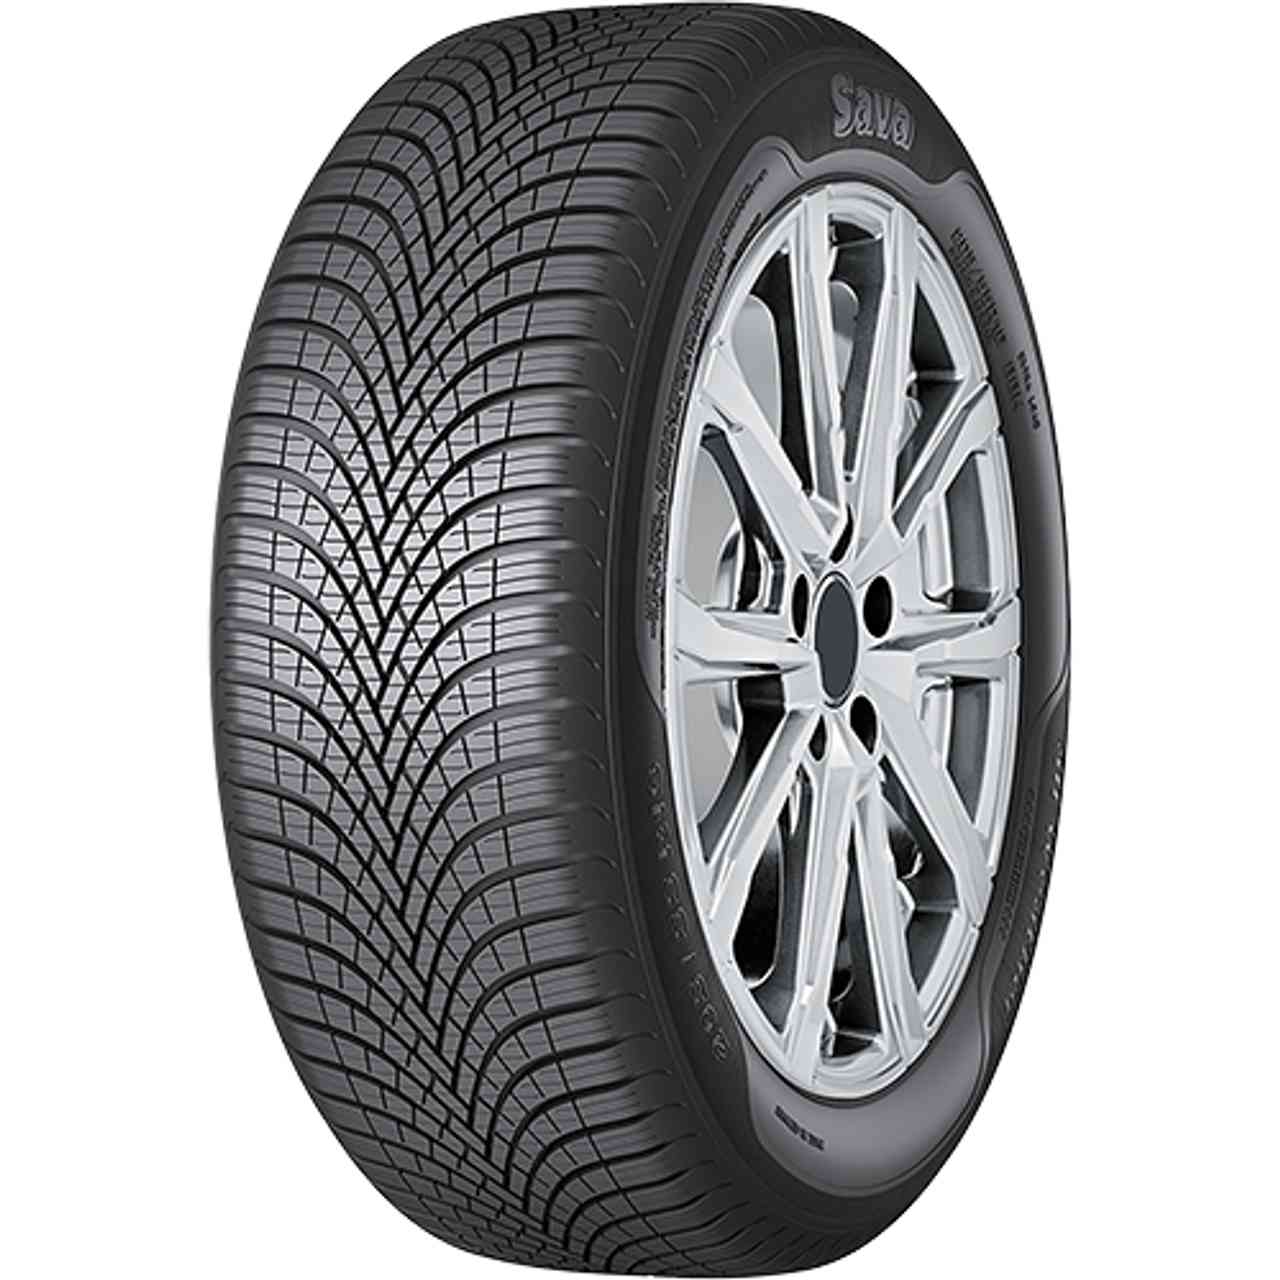 SAVA ALL WEATHER 215/55R17 98V BSW